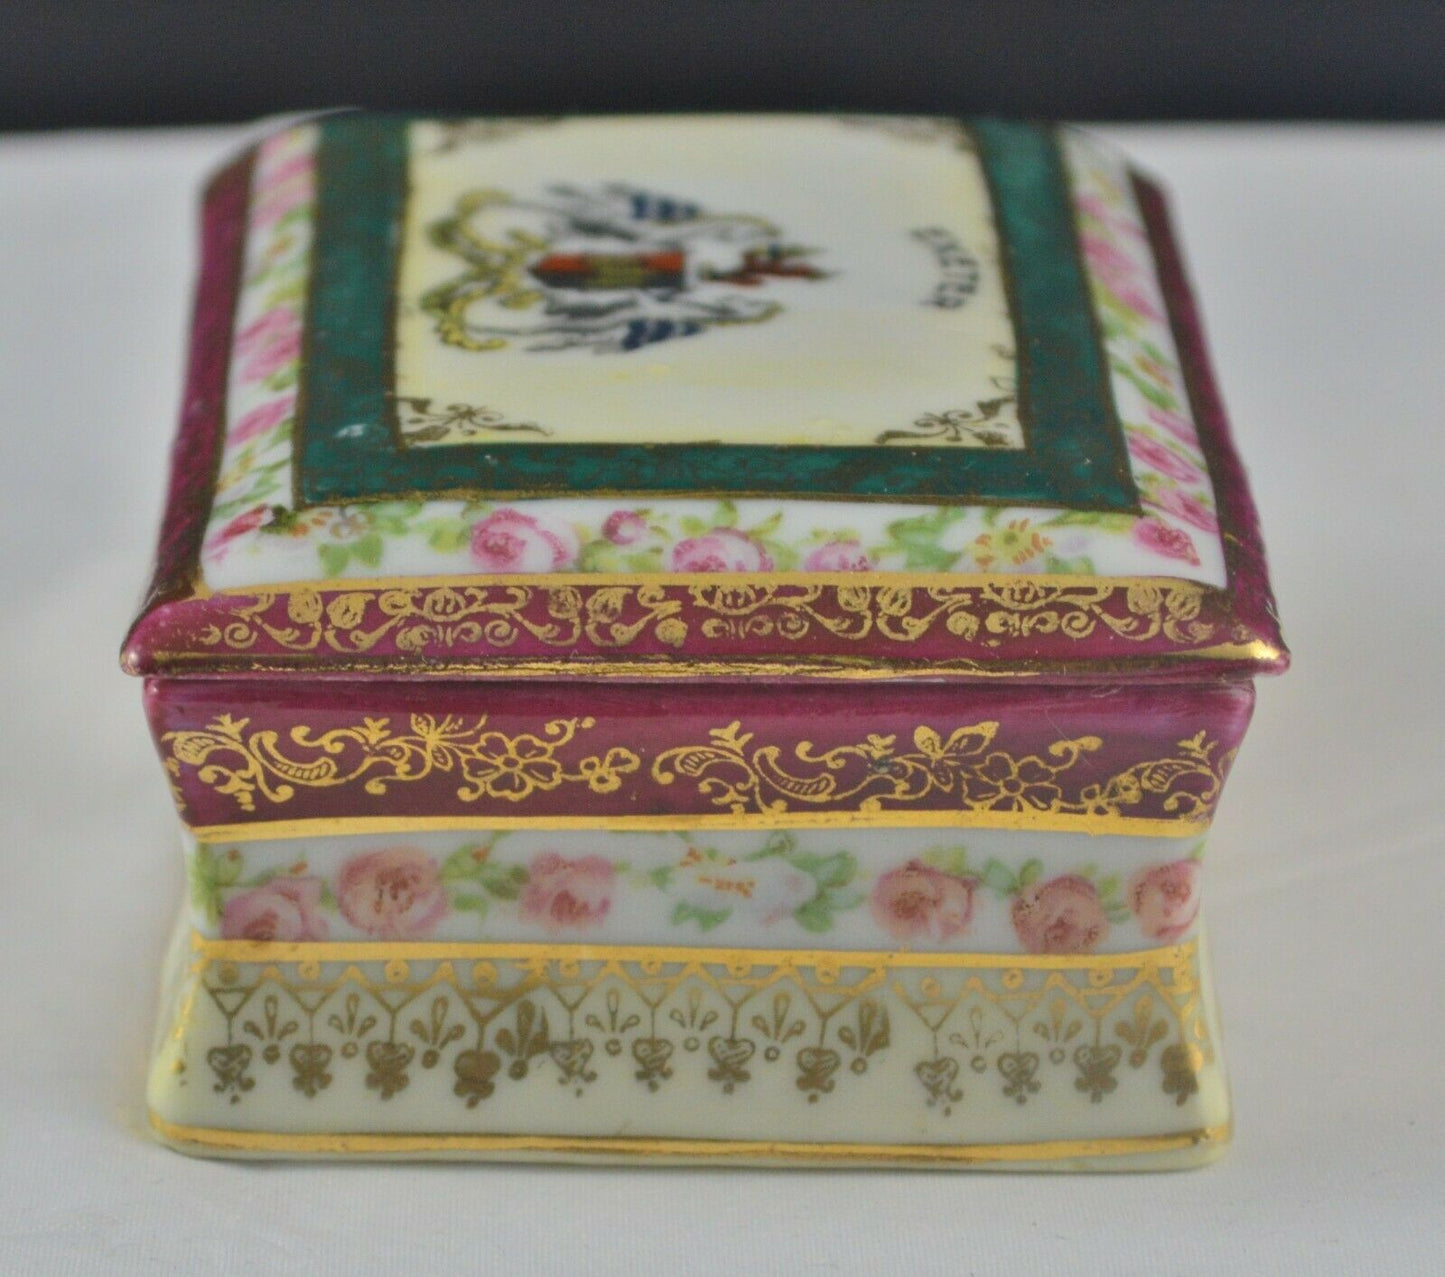 TRINKET BOX EXETER(PREVIOUSLY OWNED) GOOD CONDITION - TMD167207